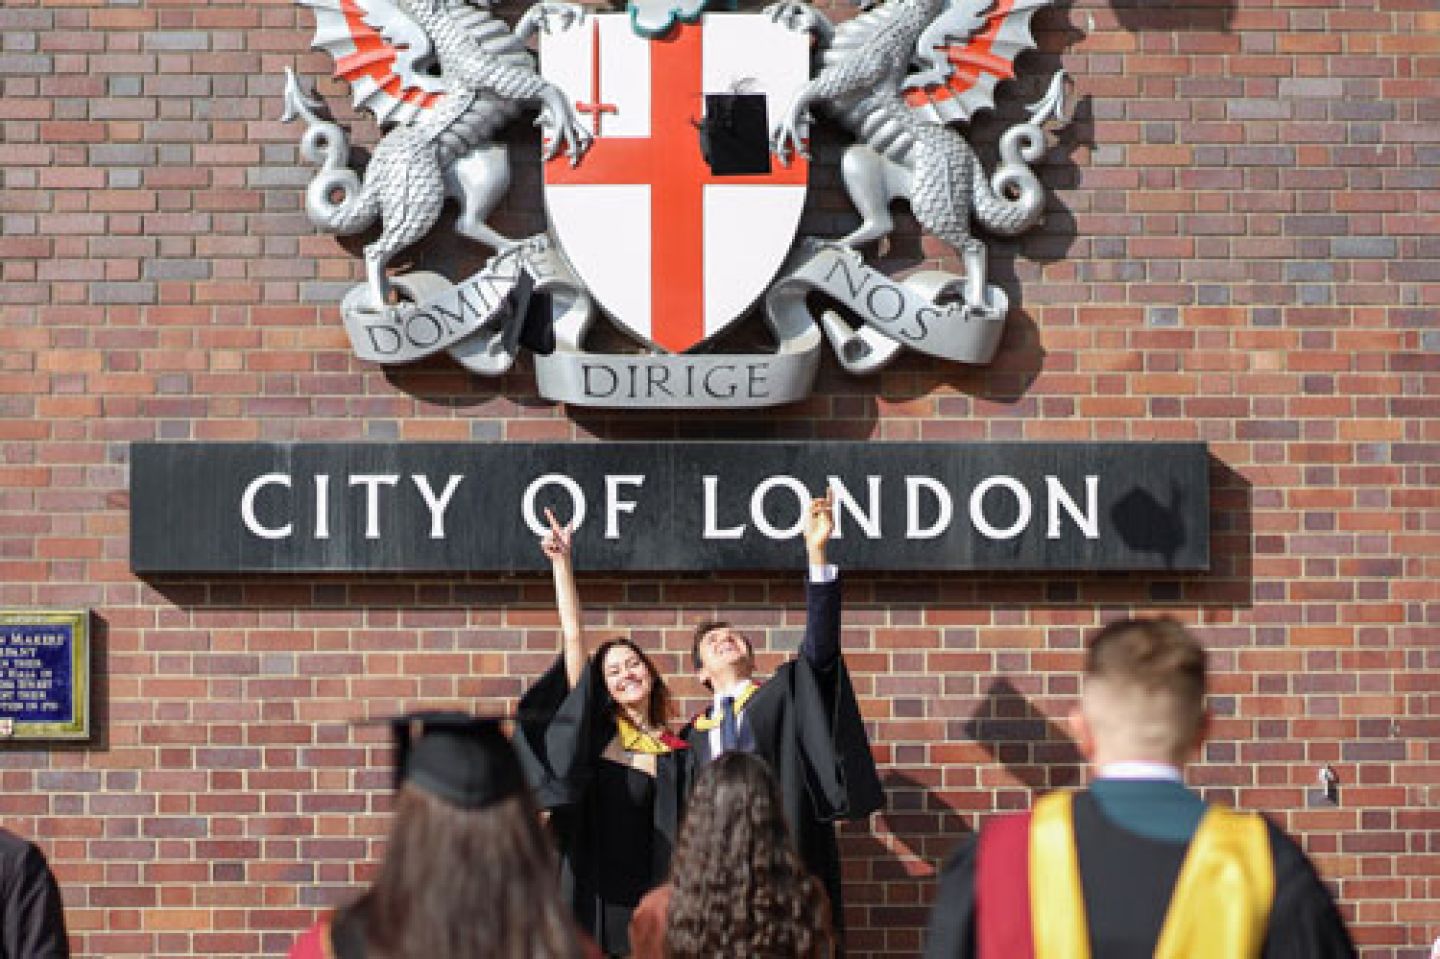 Two graduates throw their hats in the air in front of the City of London sign.